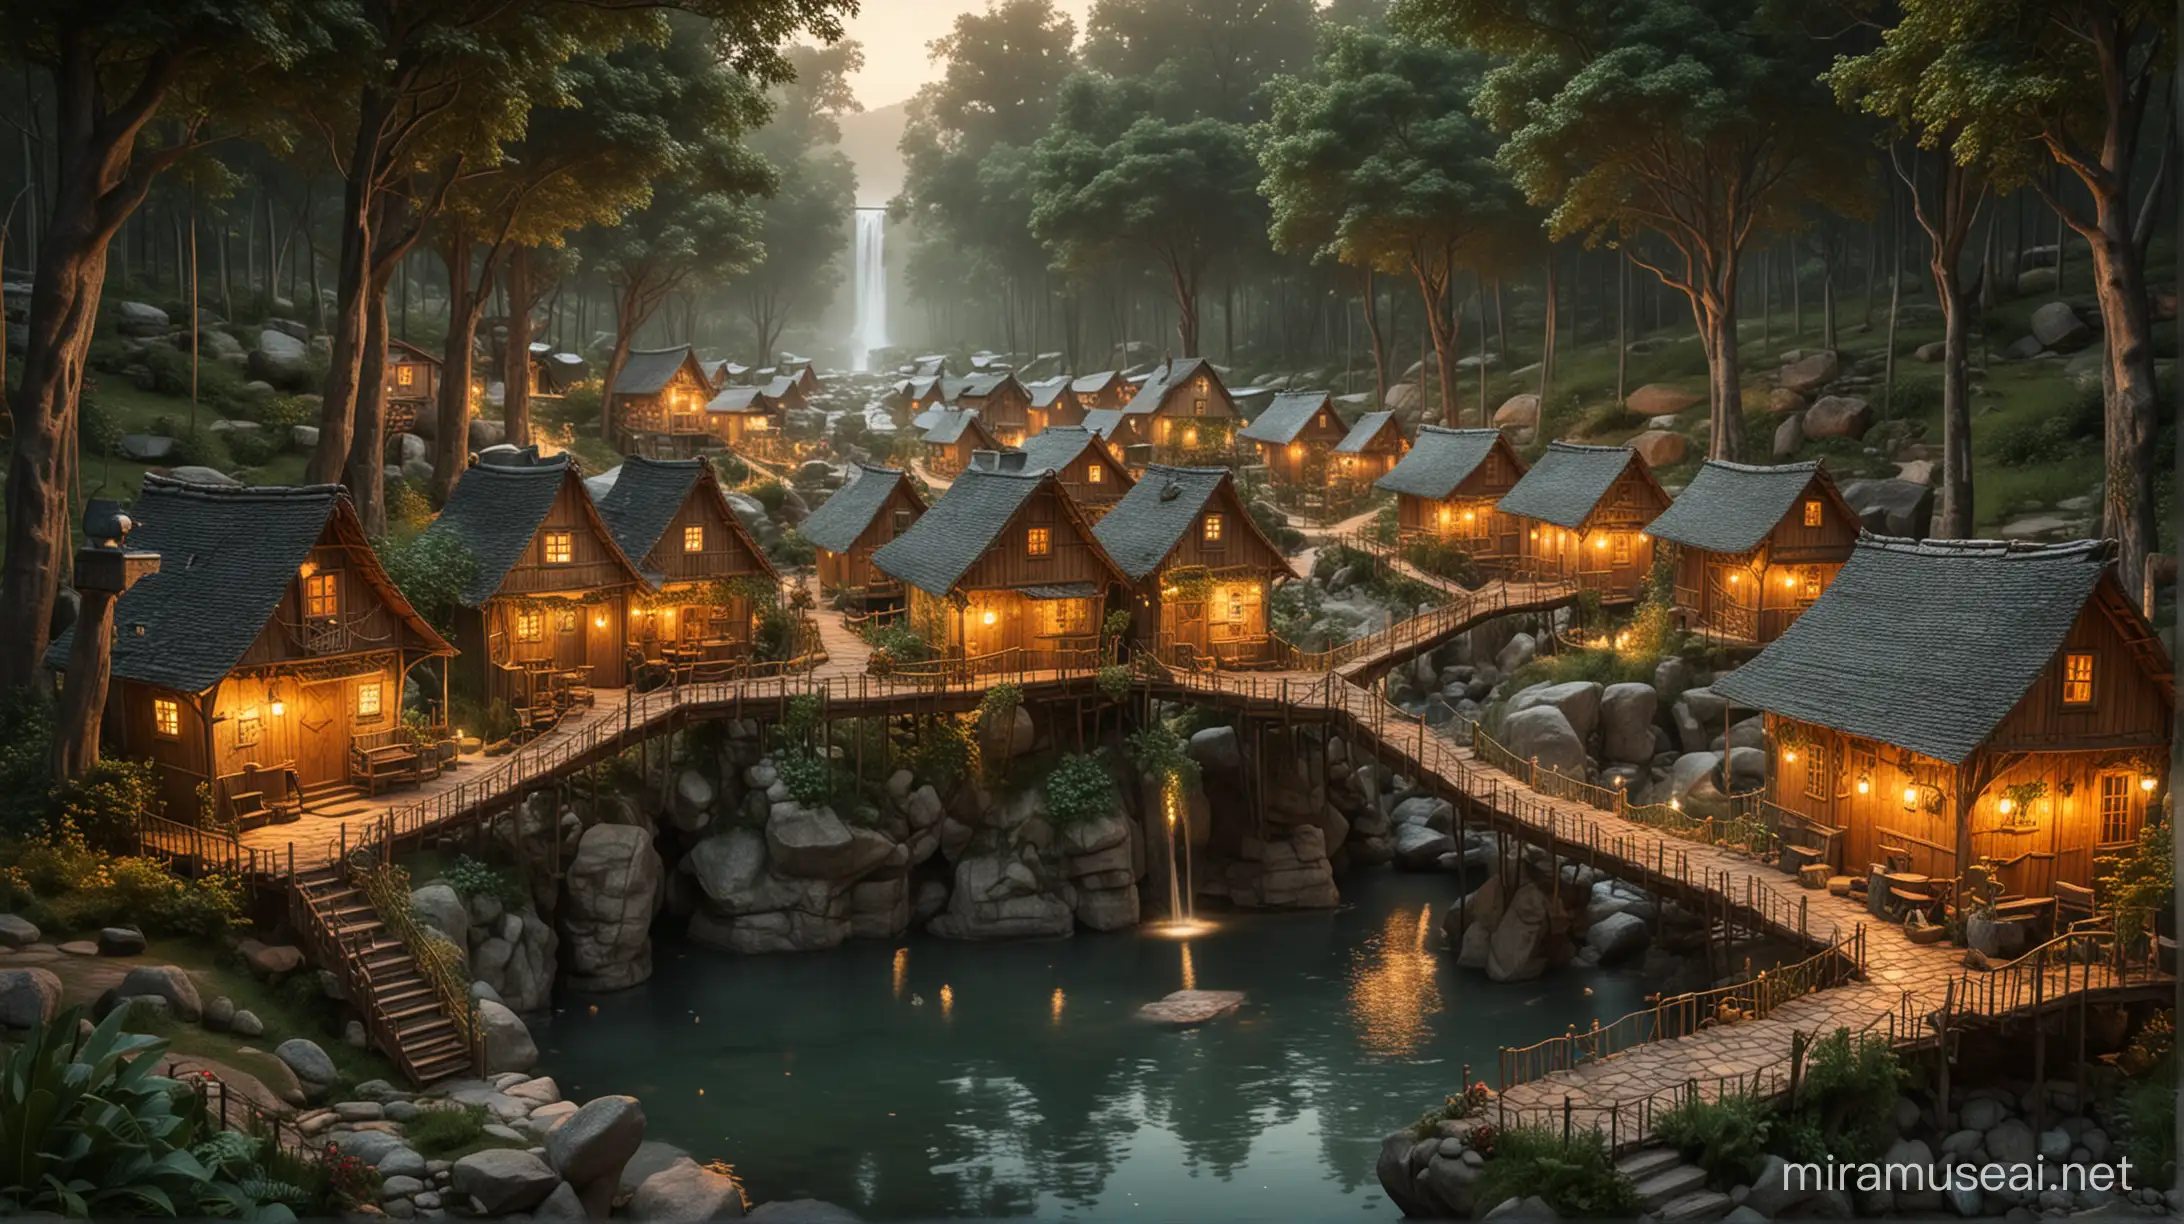 in a horizontal landscape format, a magical village of warm glowing lights in a lush green forest where small rows of houses are made of guitars. The guitar houses and trees blend in harmony so that it is a smooth transition between tree and house. Tree house and guitar become one. There is a stream with beautiful rocks and clear water and a fountain in the center of the village square. It has a mythical, fantasy, magical quality to it.